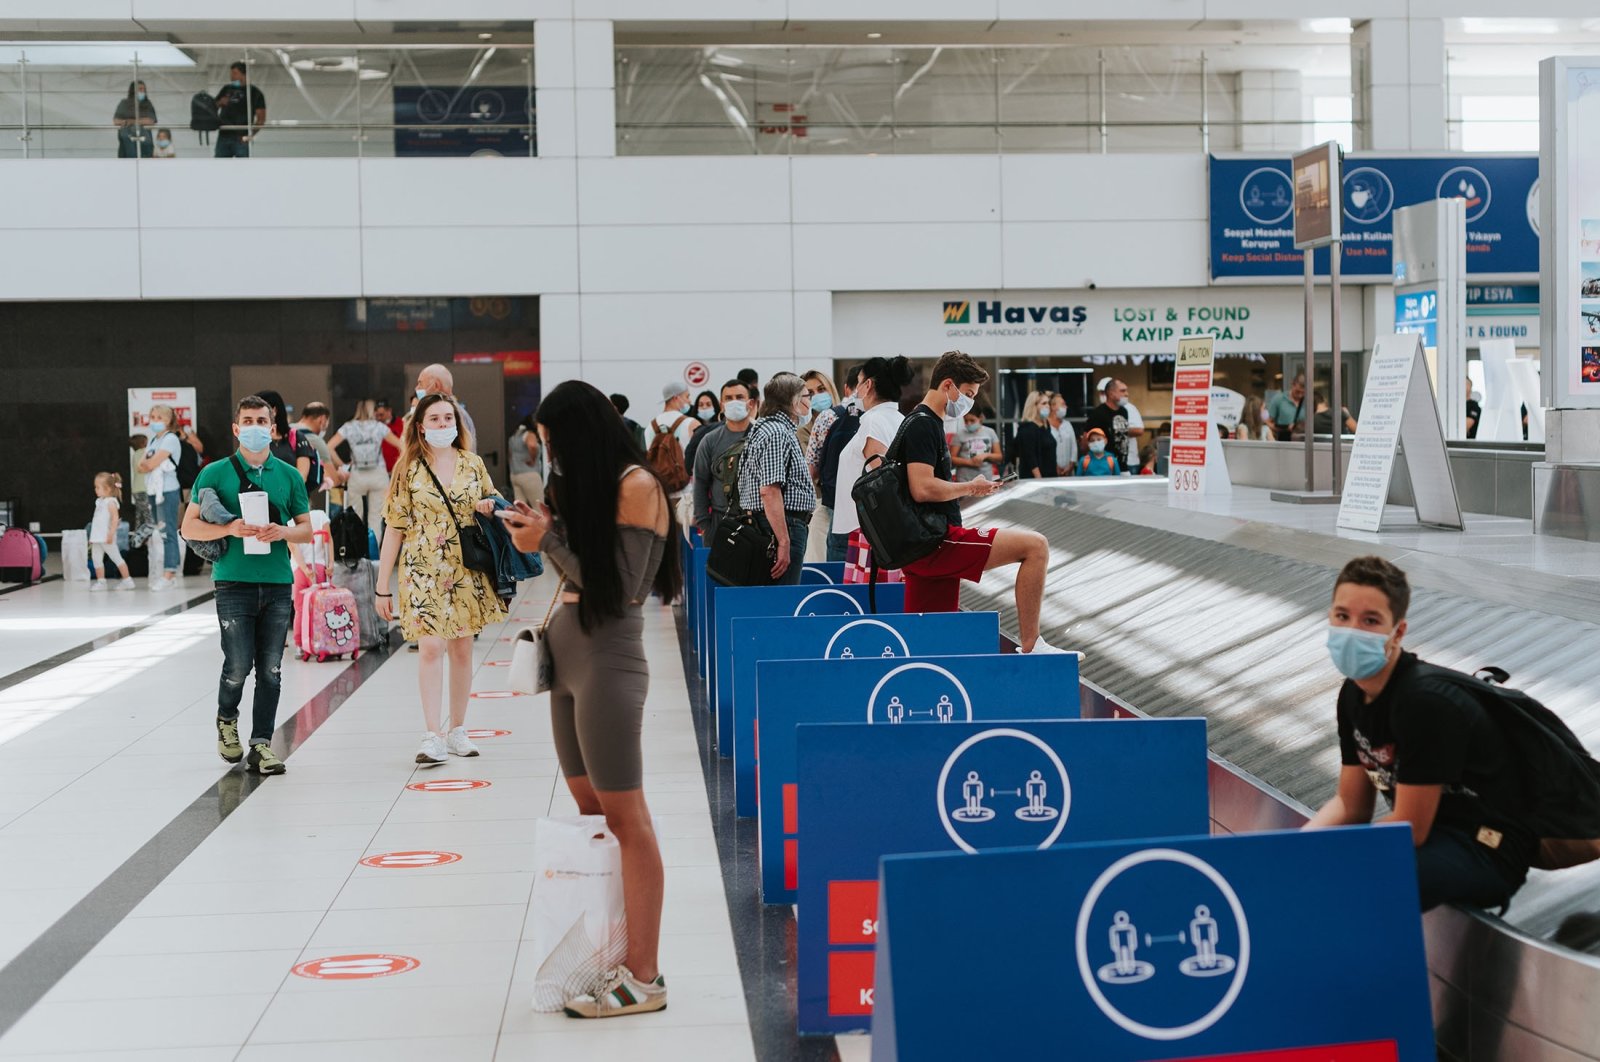 People wait for their luggage at the airport in Antalya, Turkey, August 2020. (Shutterstock Photo)